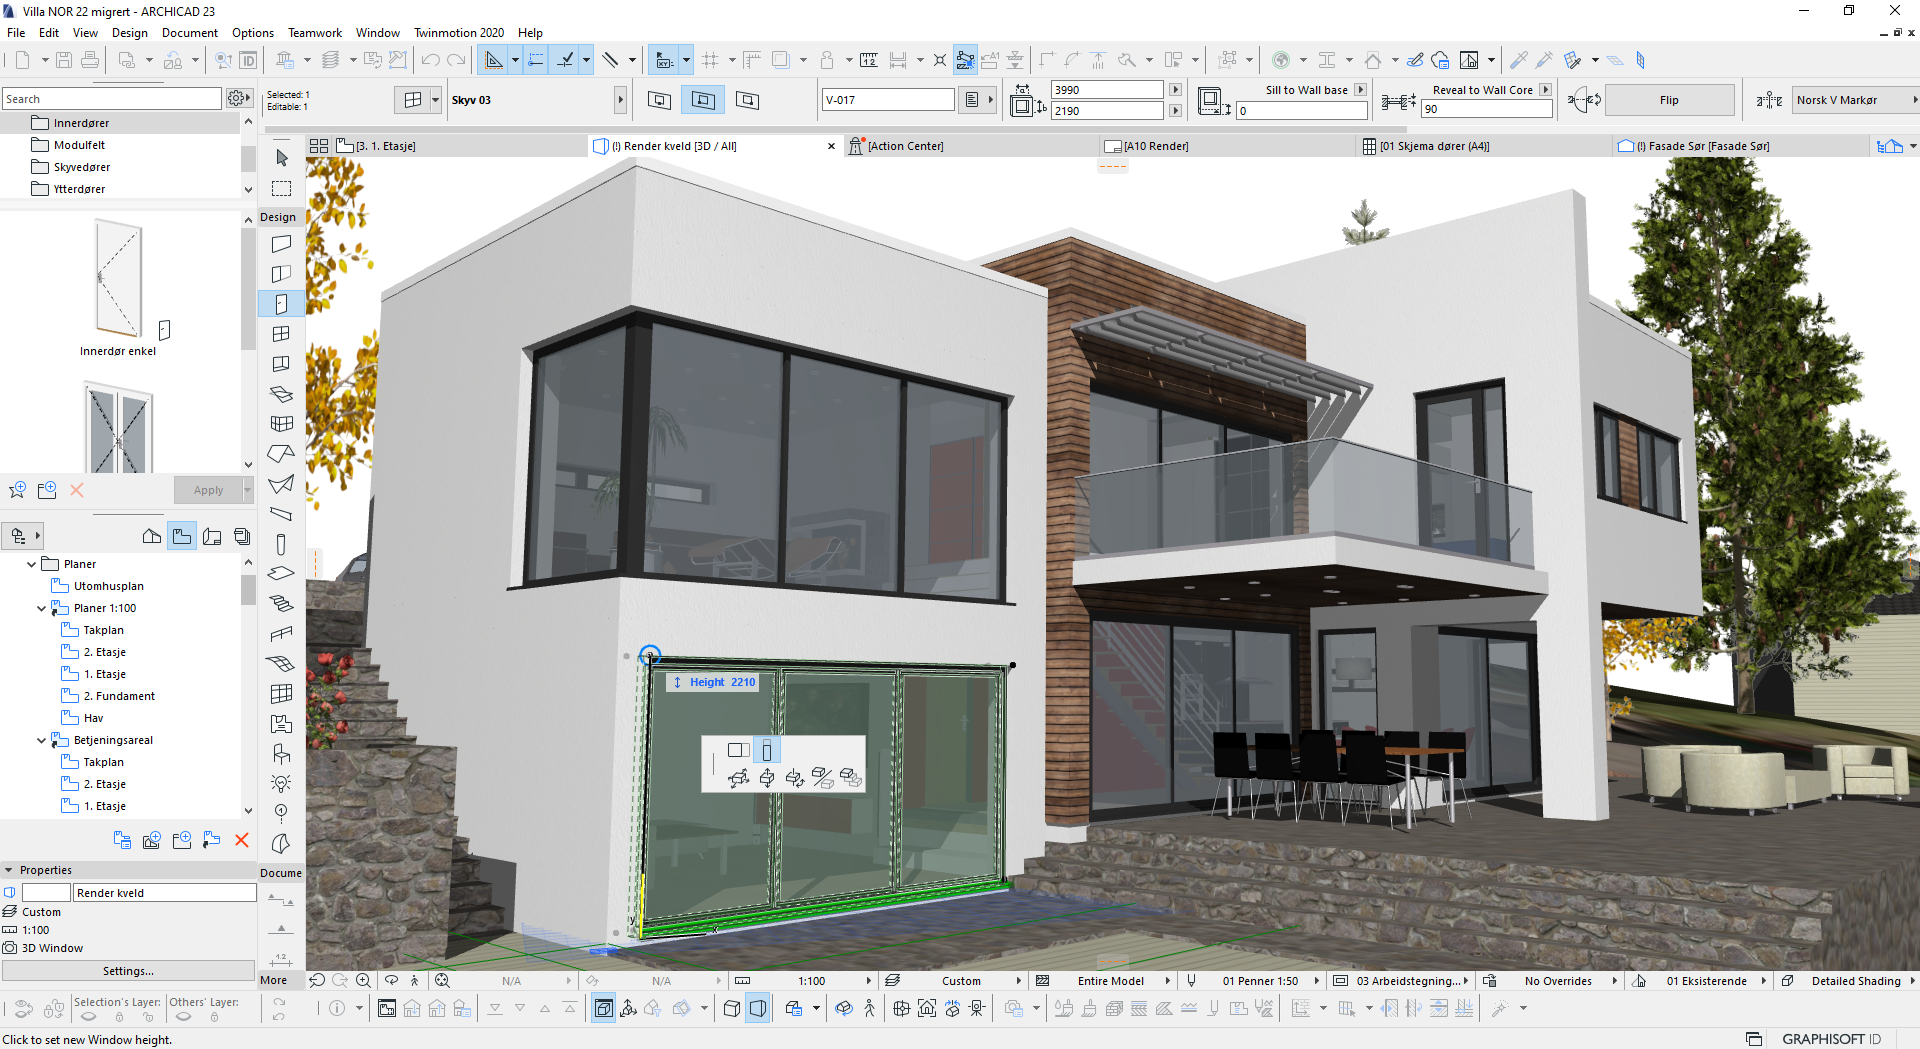 archicad viewer